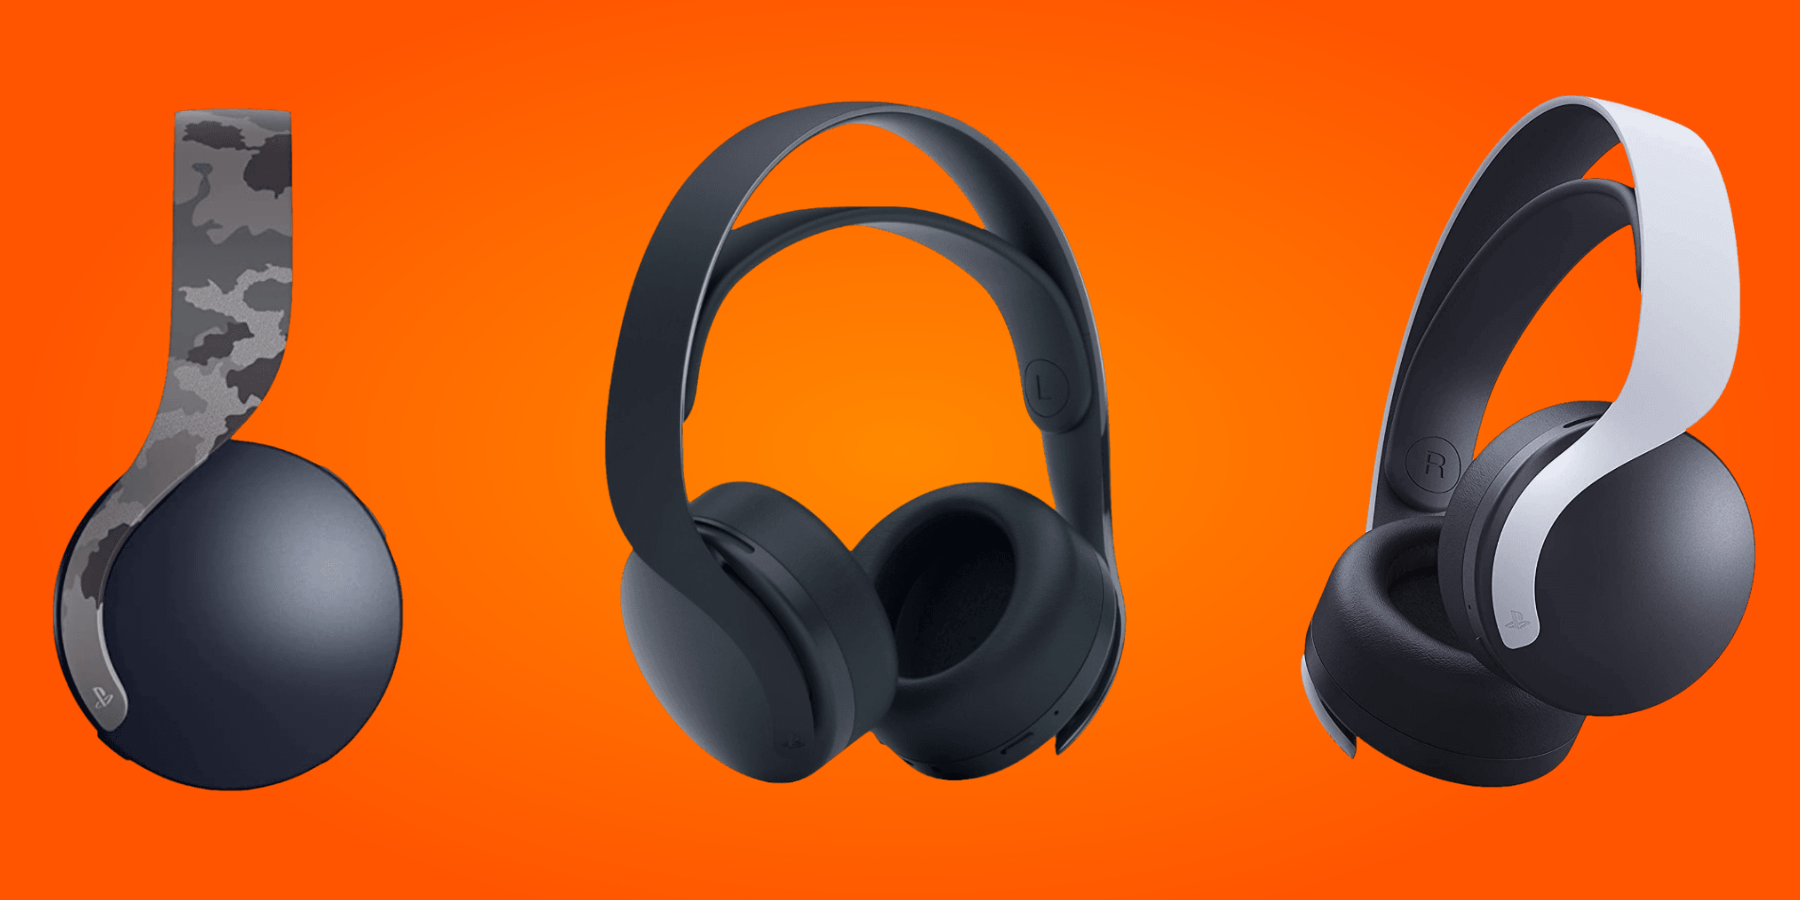 Sony Pulse 3D Wireless Headset Review